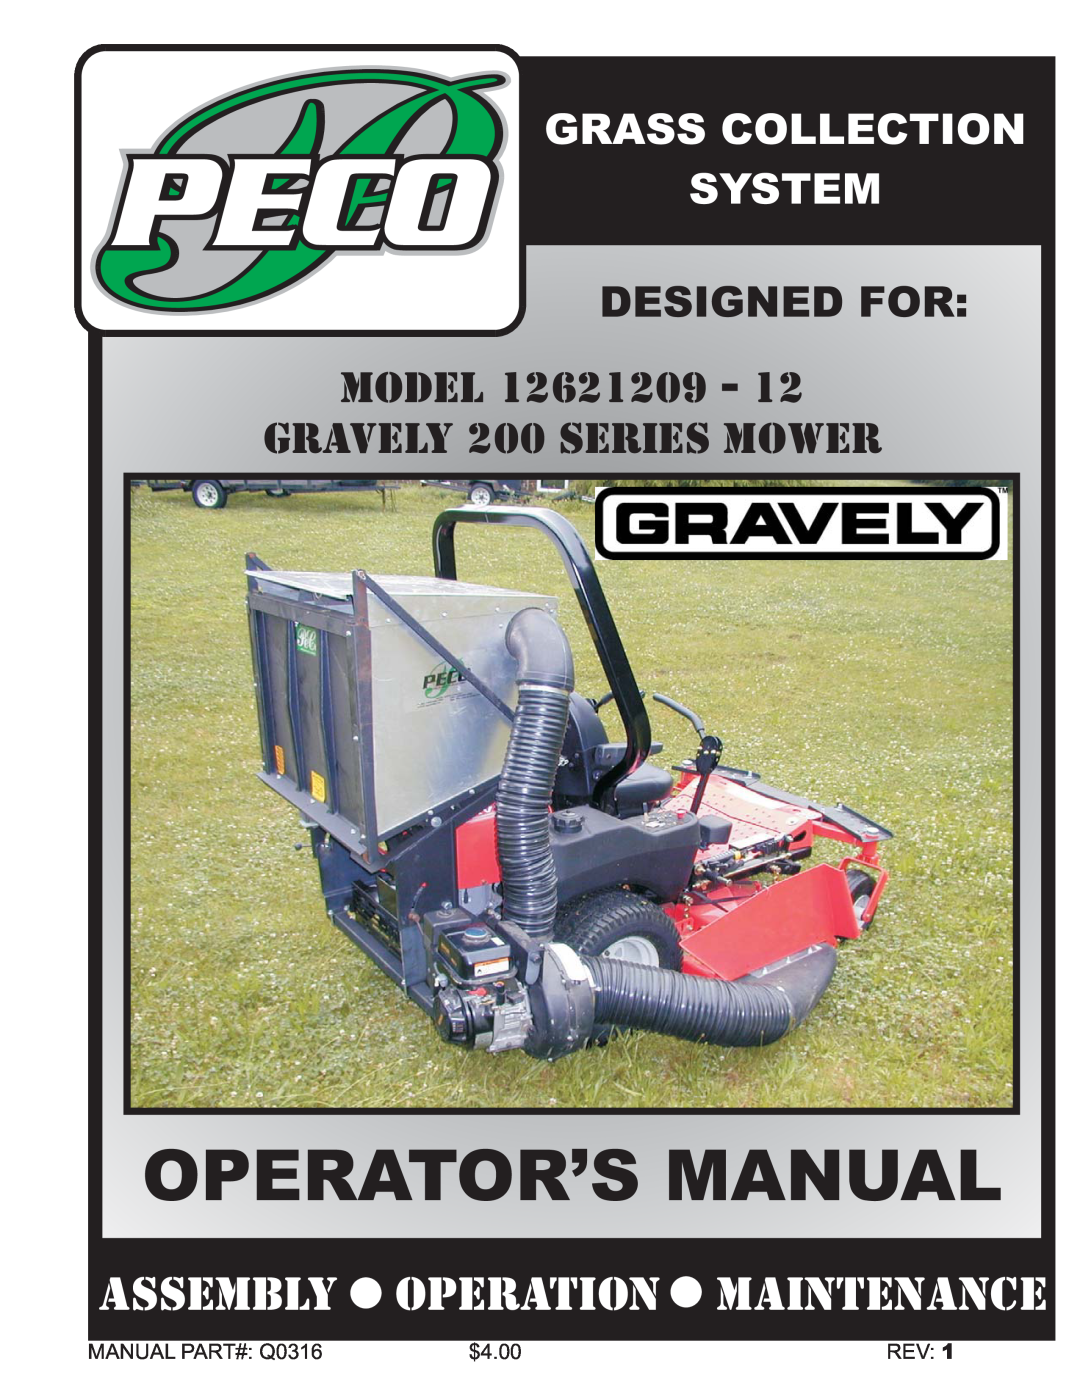 Gravely 12621209-12 manual Model, Peco, Operator’S Manual, Assembly Operation Maintenance, Grass Collection, System, $4.00 